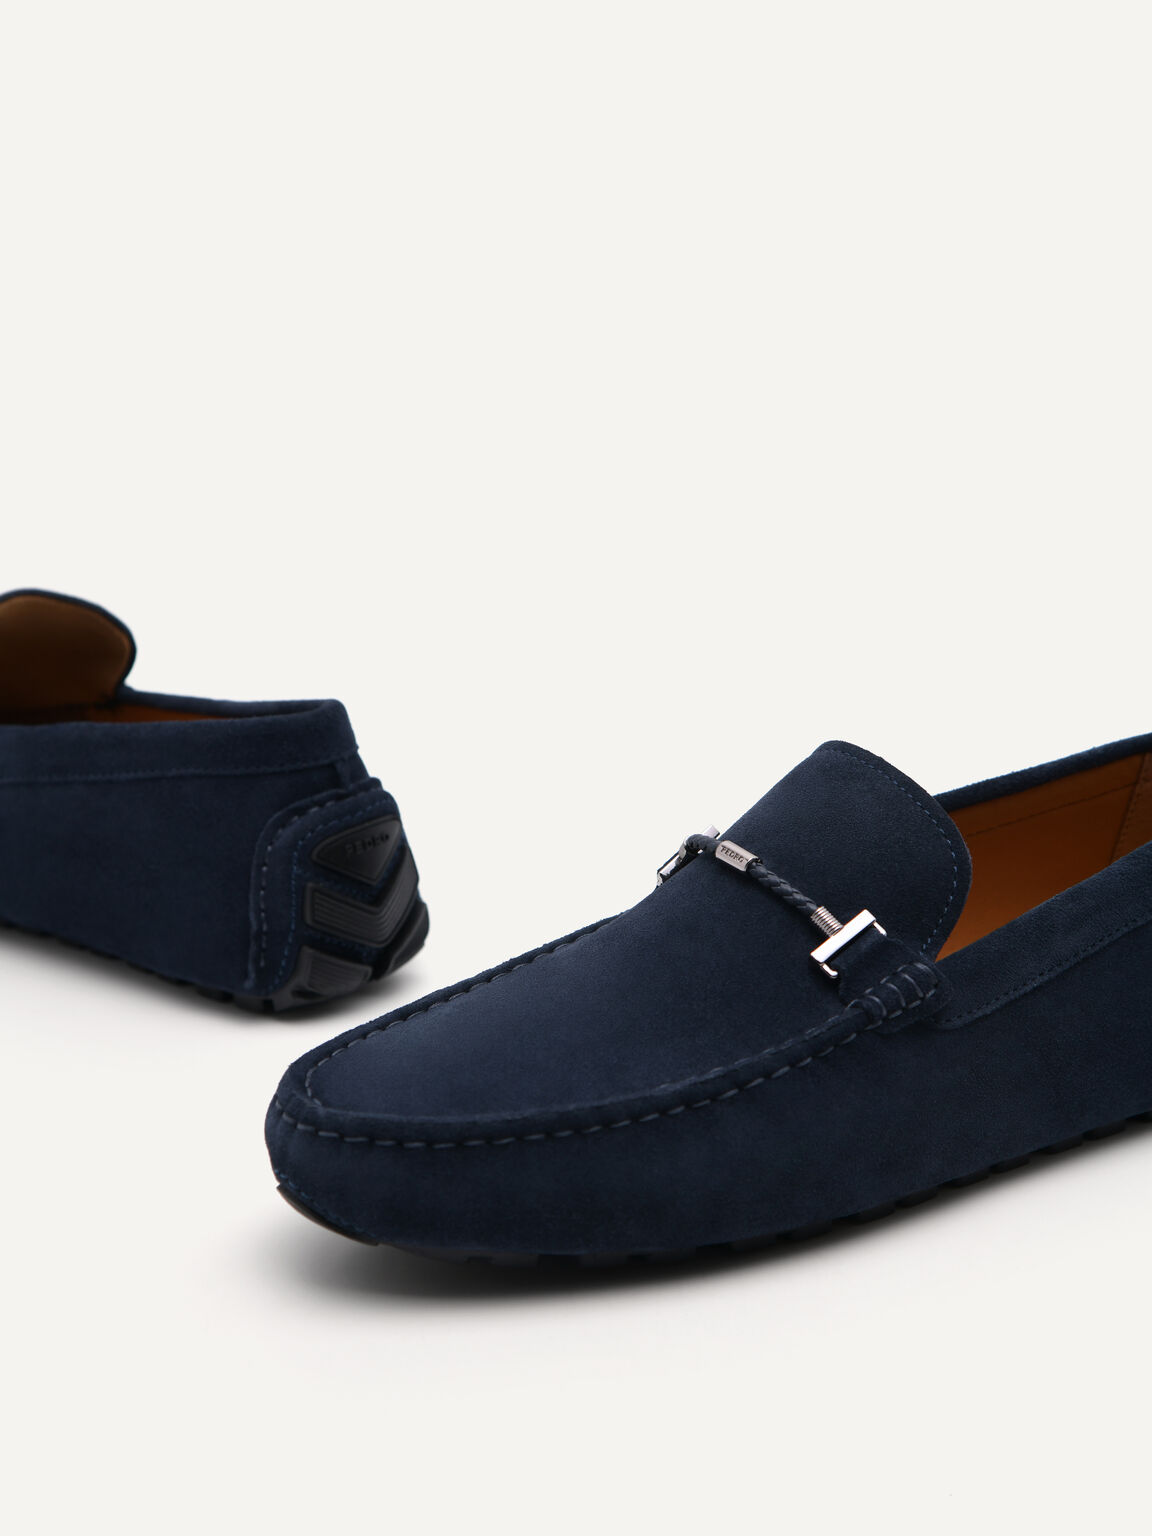 Robert Leather Moccasins, Navy